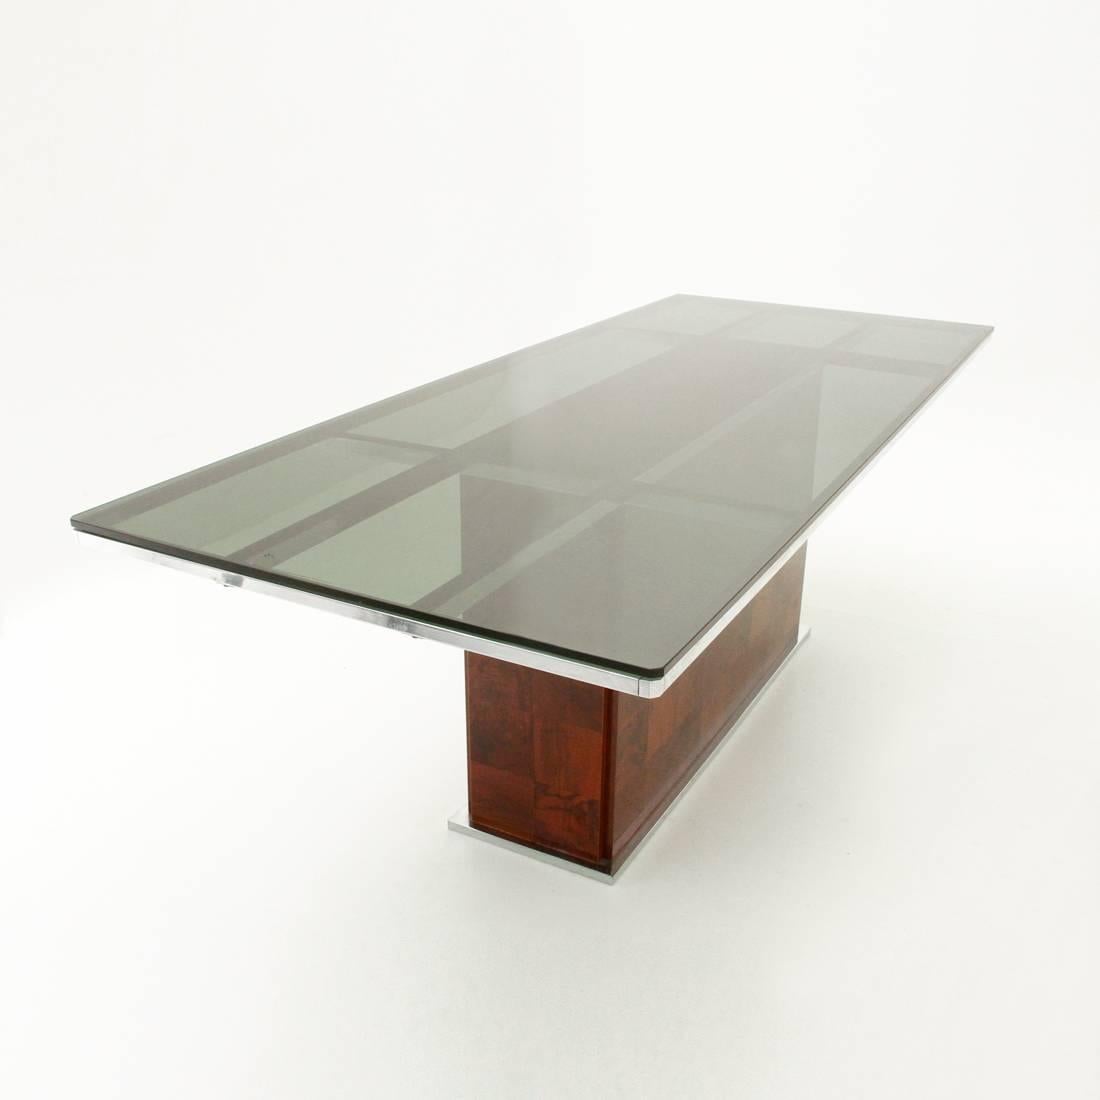 Table produced in the 1970s by Mario Sabot on Willy Rizzo's design.
Steel structure with base covered in burl.
Glass top with cut corners.
Very good general conditions.

Dimensions: Width 220 cm, depth 91 cm, height 74 cm.
 